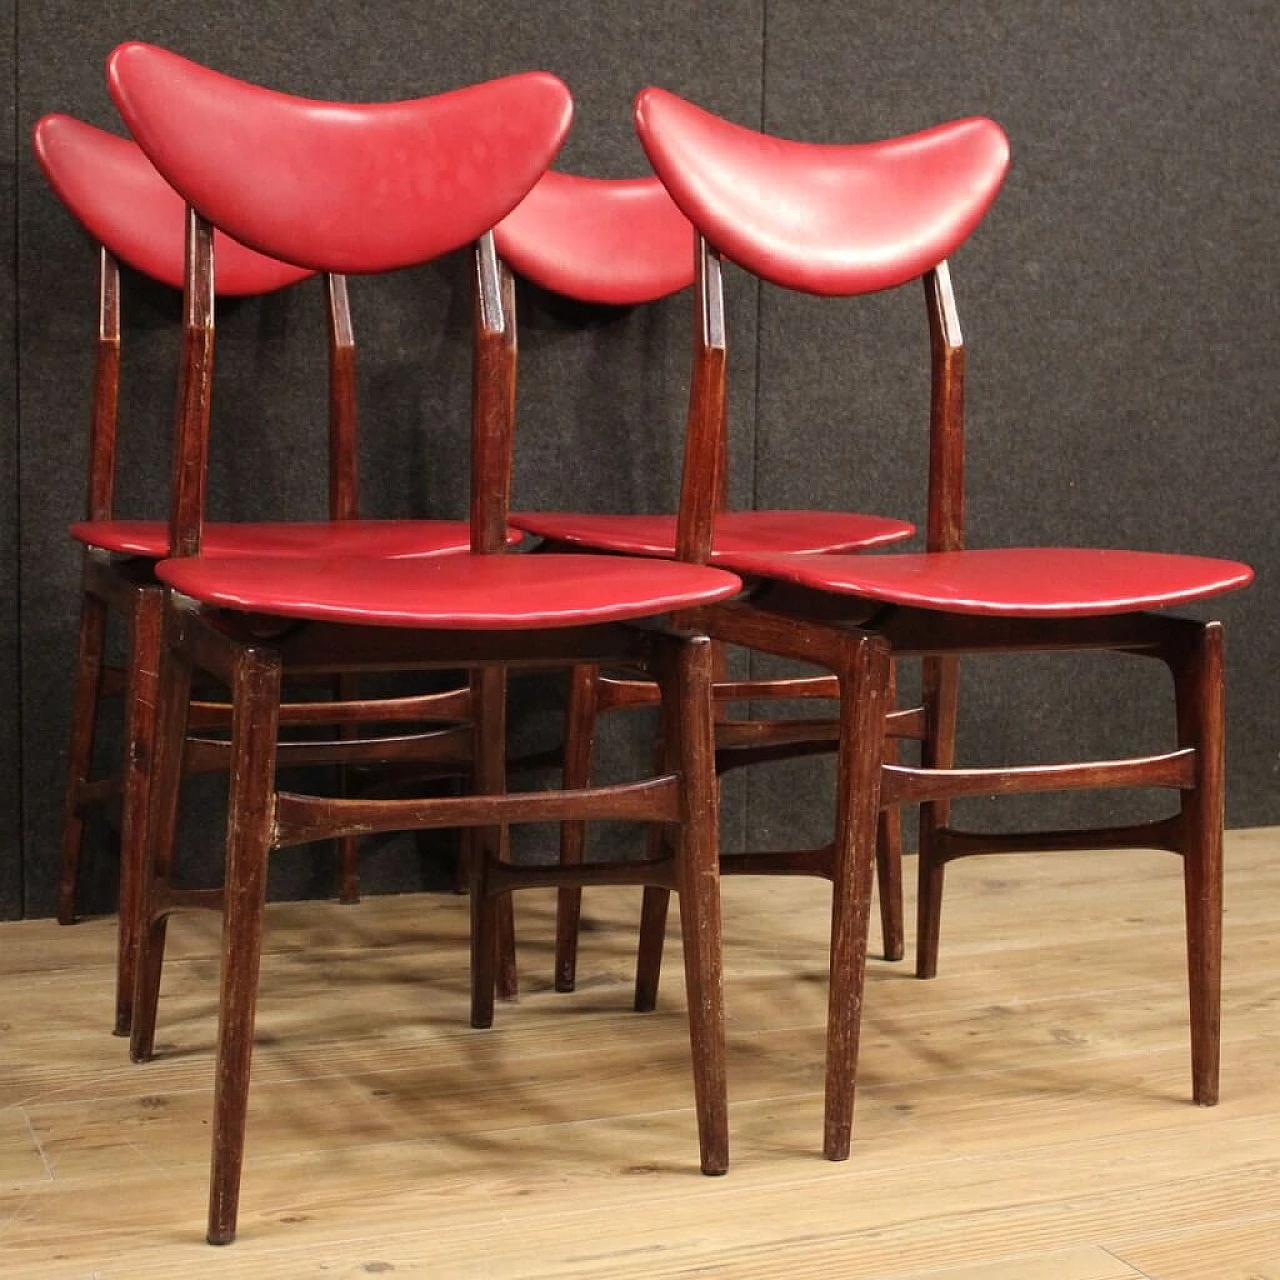 4 Italian chairs in wood and pleather, 70s 1106920